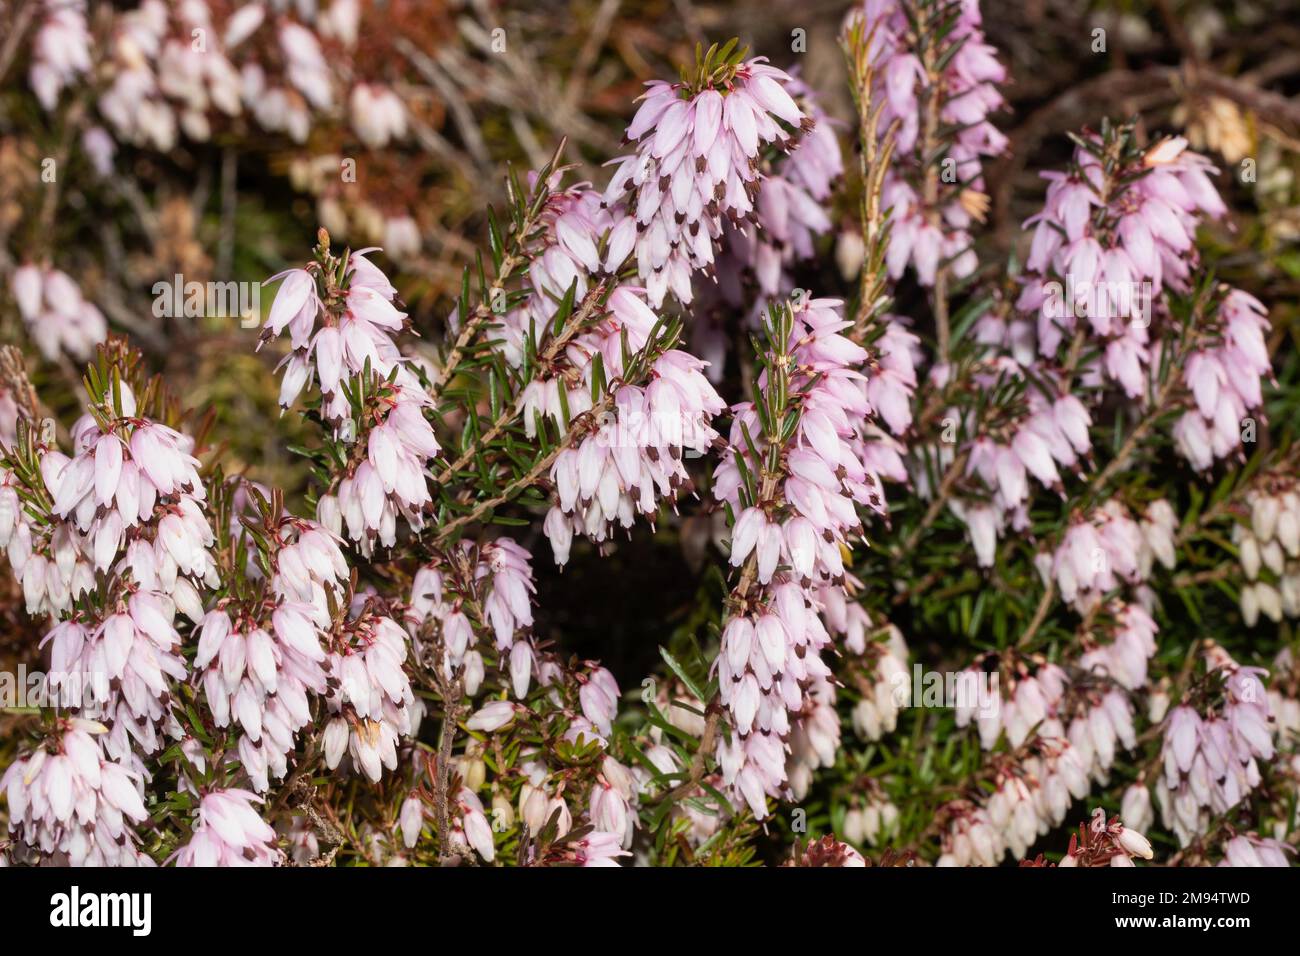 Snow bell heather, snow heather Stock with several flower panicles with many pink flowers Stock Photo